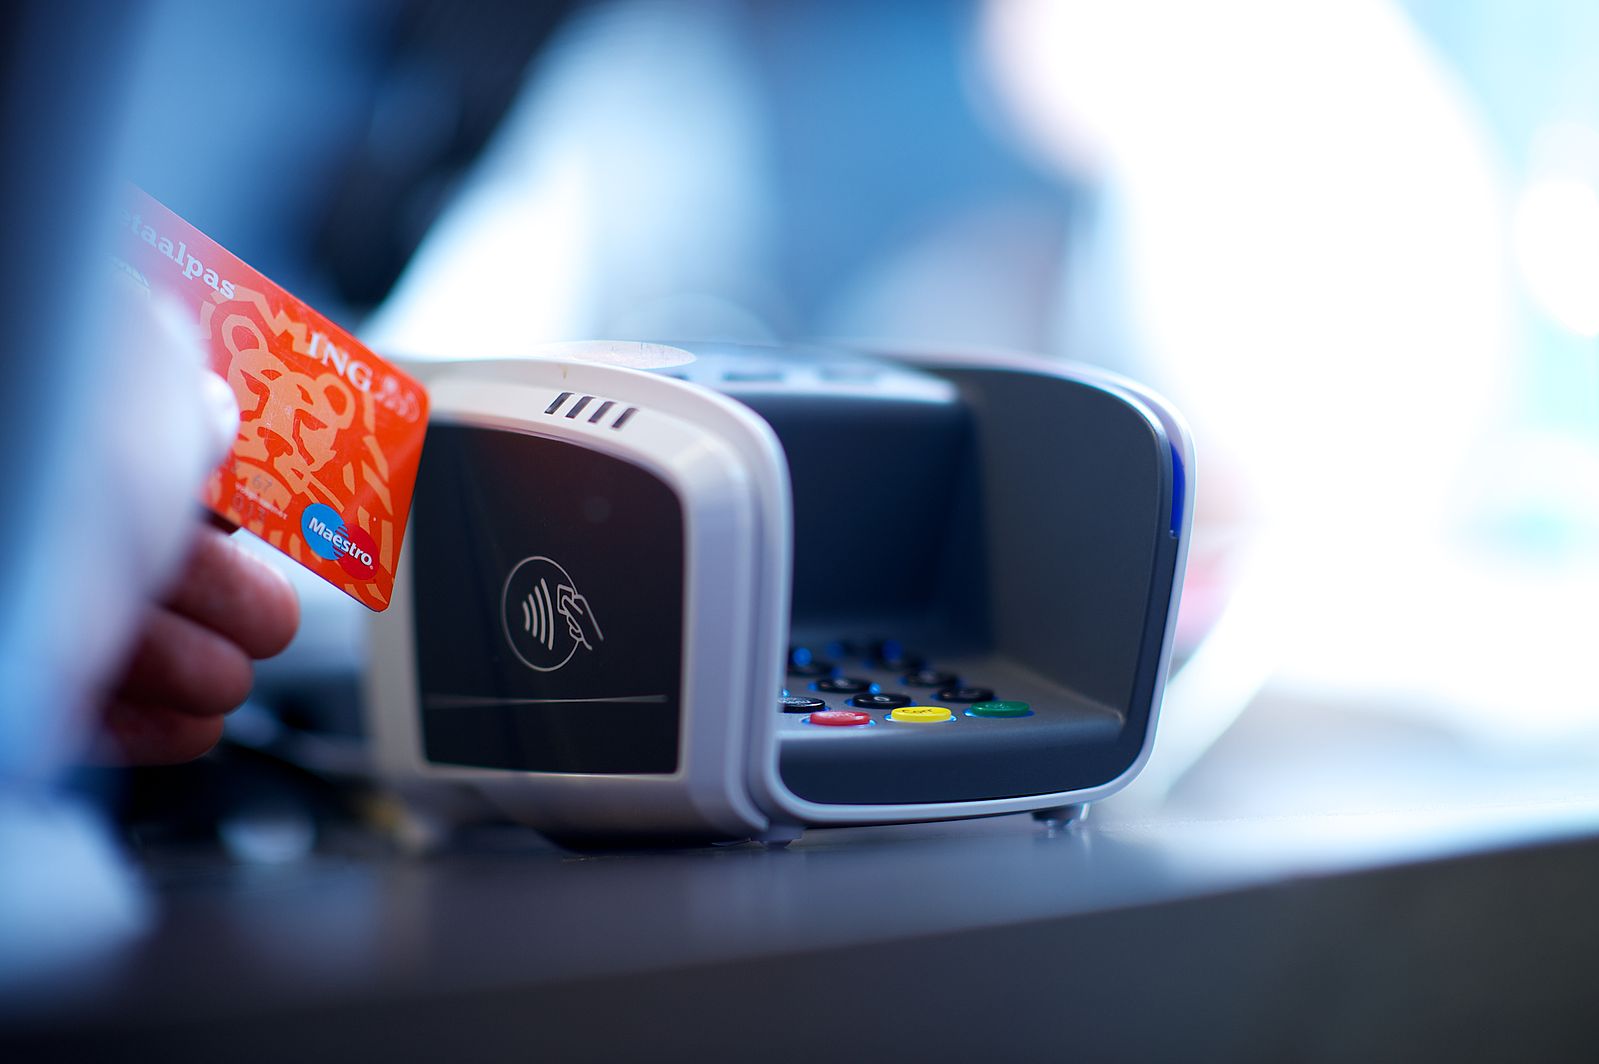 Contactless payment using a credit card